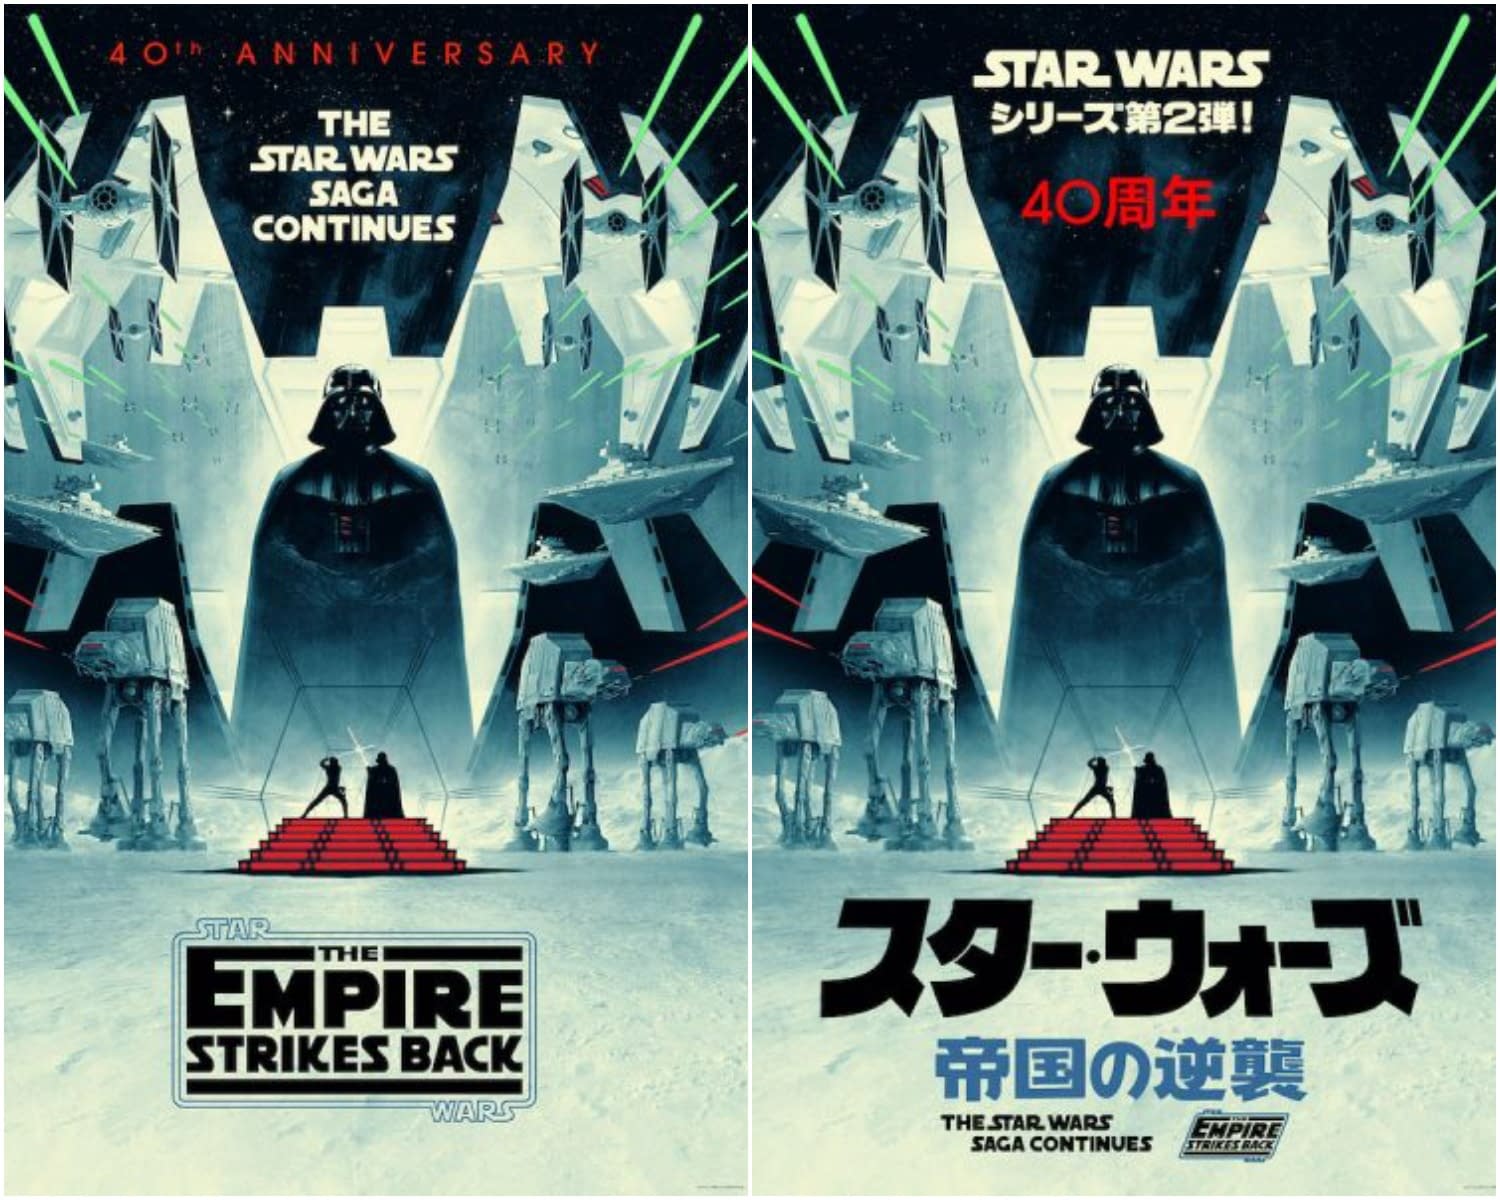 Star Wars Empire Strikes Back 40th Anniversary Posters Available Now